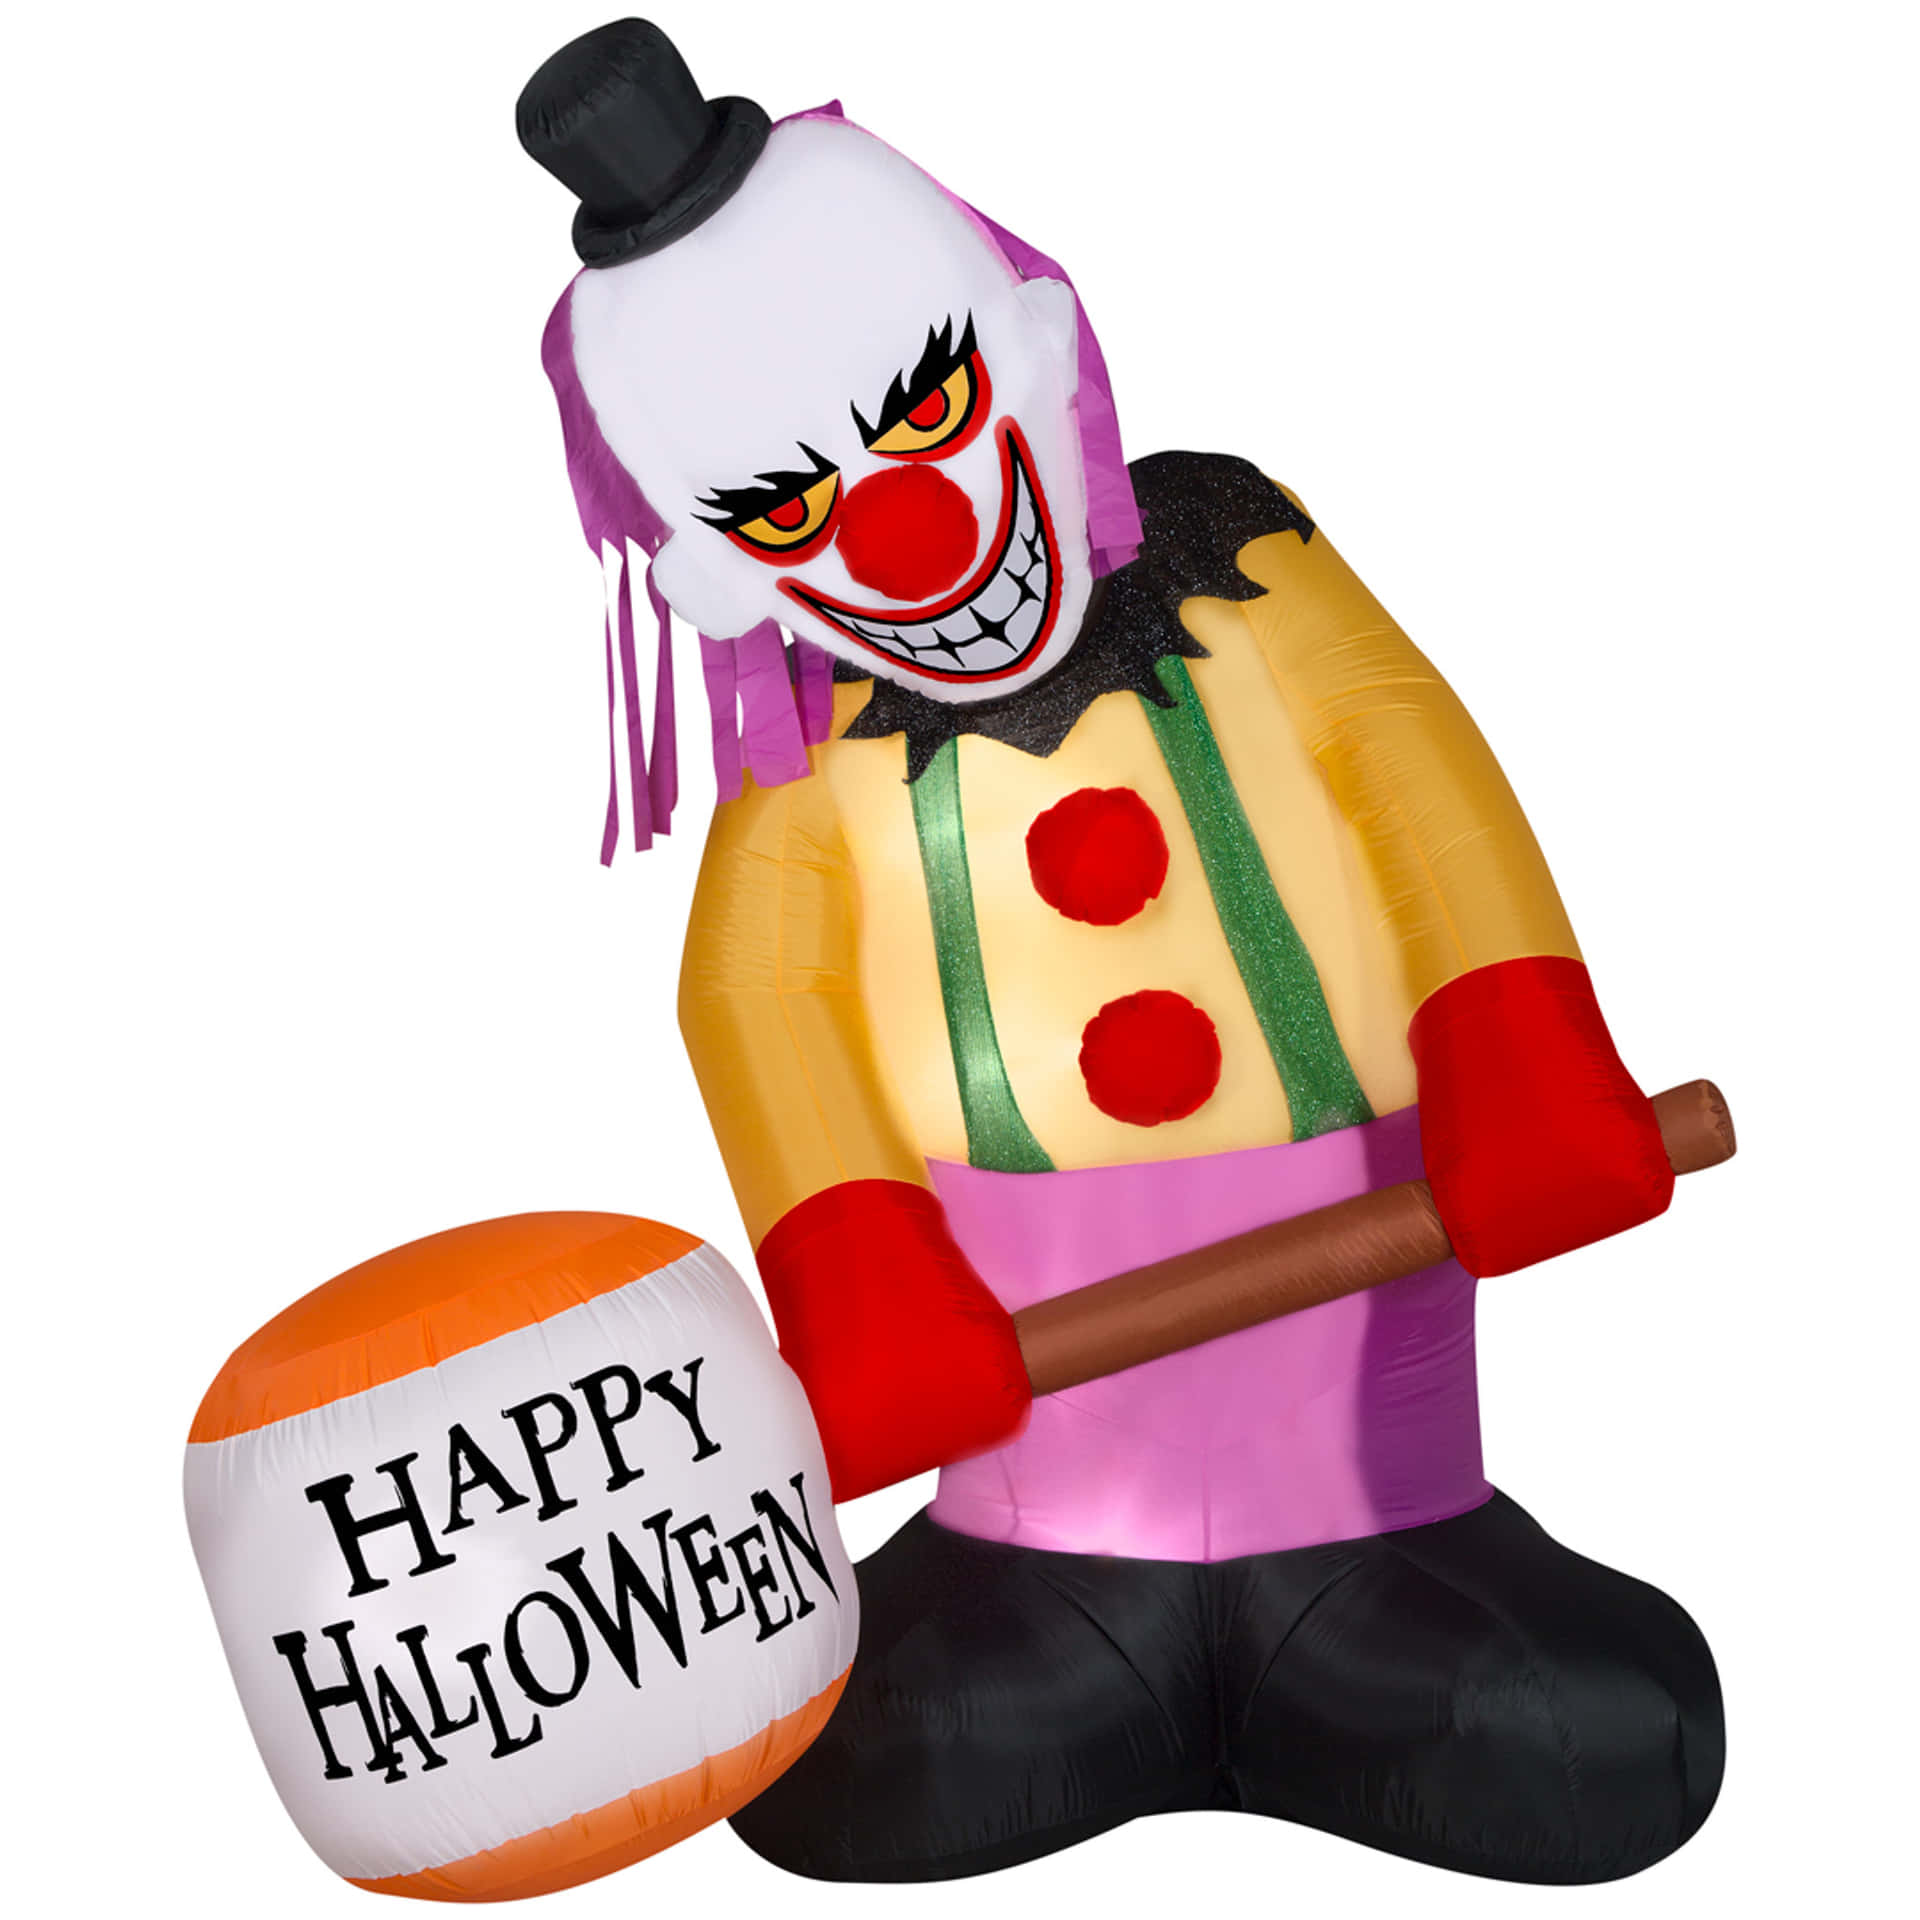 a clown holding a ball and a happy halloween sign